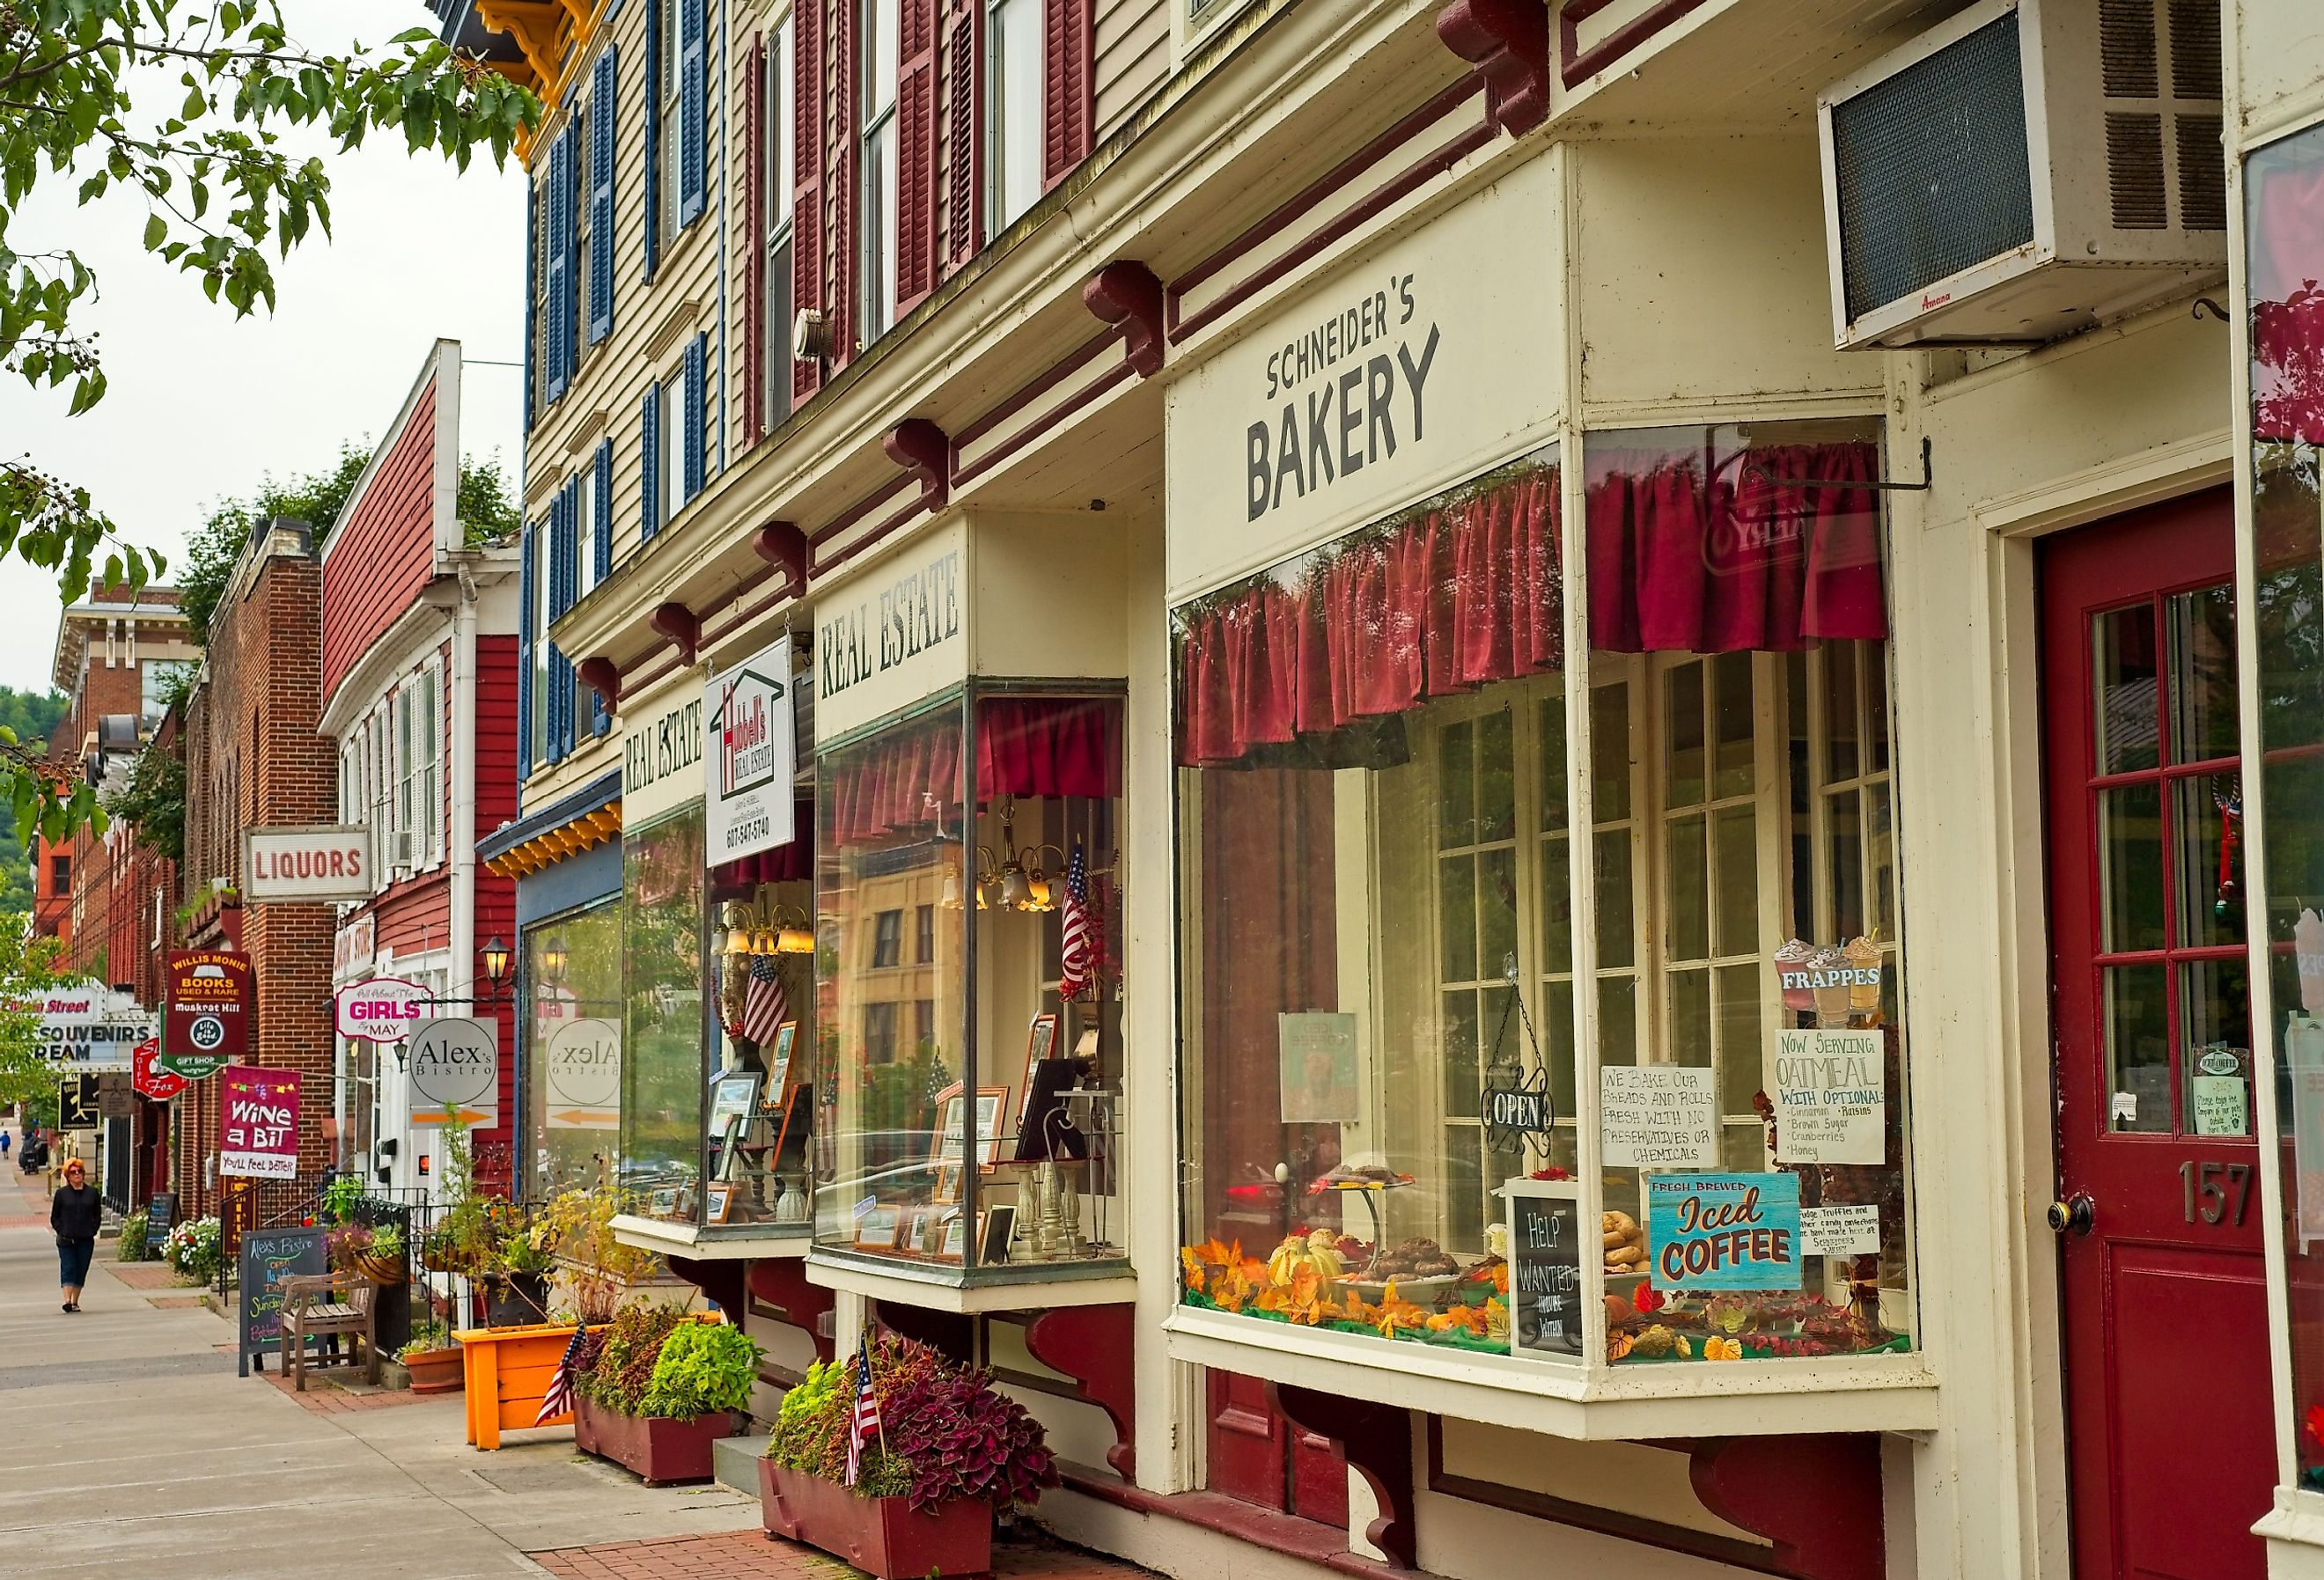 Shops, eateries, and baseball-themed attractions line the sidewalk on Main Street in this charming upstate New York town. Image credit Kenneth Sponsler via Shutterstock.